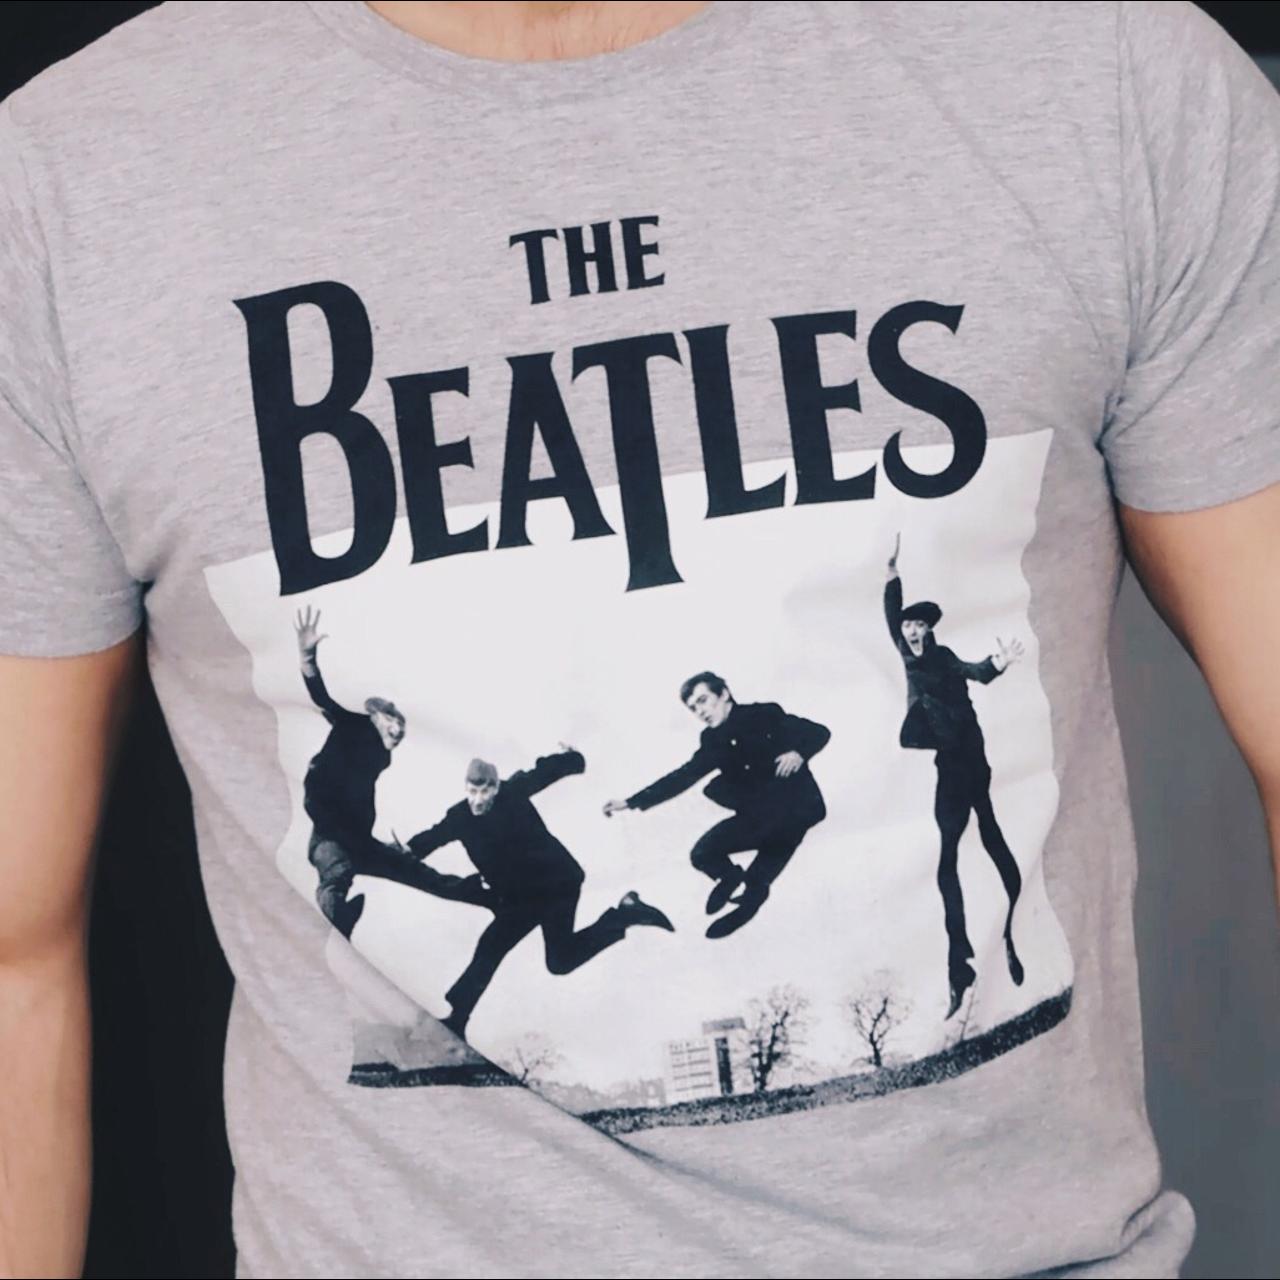 Vintage Beatles shirt. I am 5”8 and 140 pounds and...